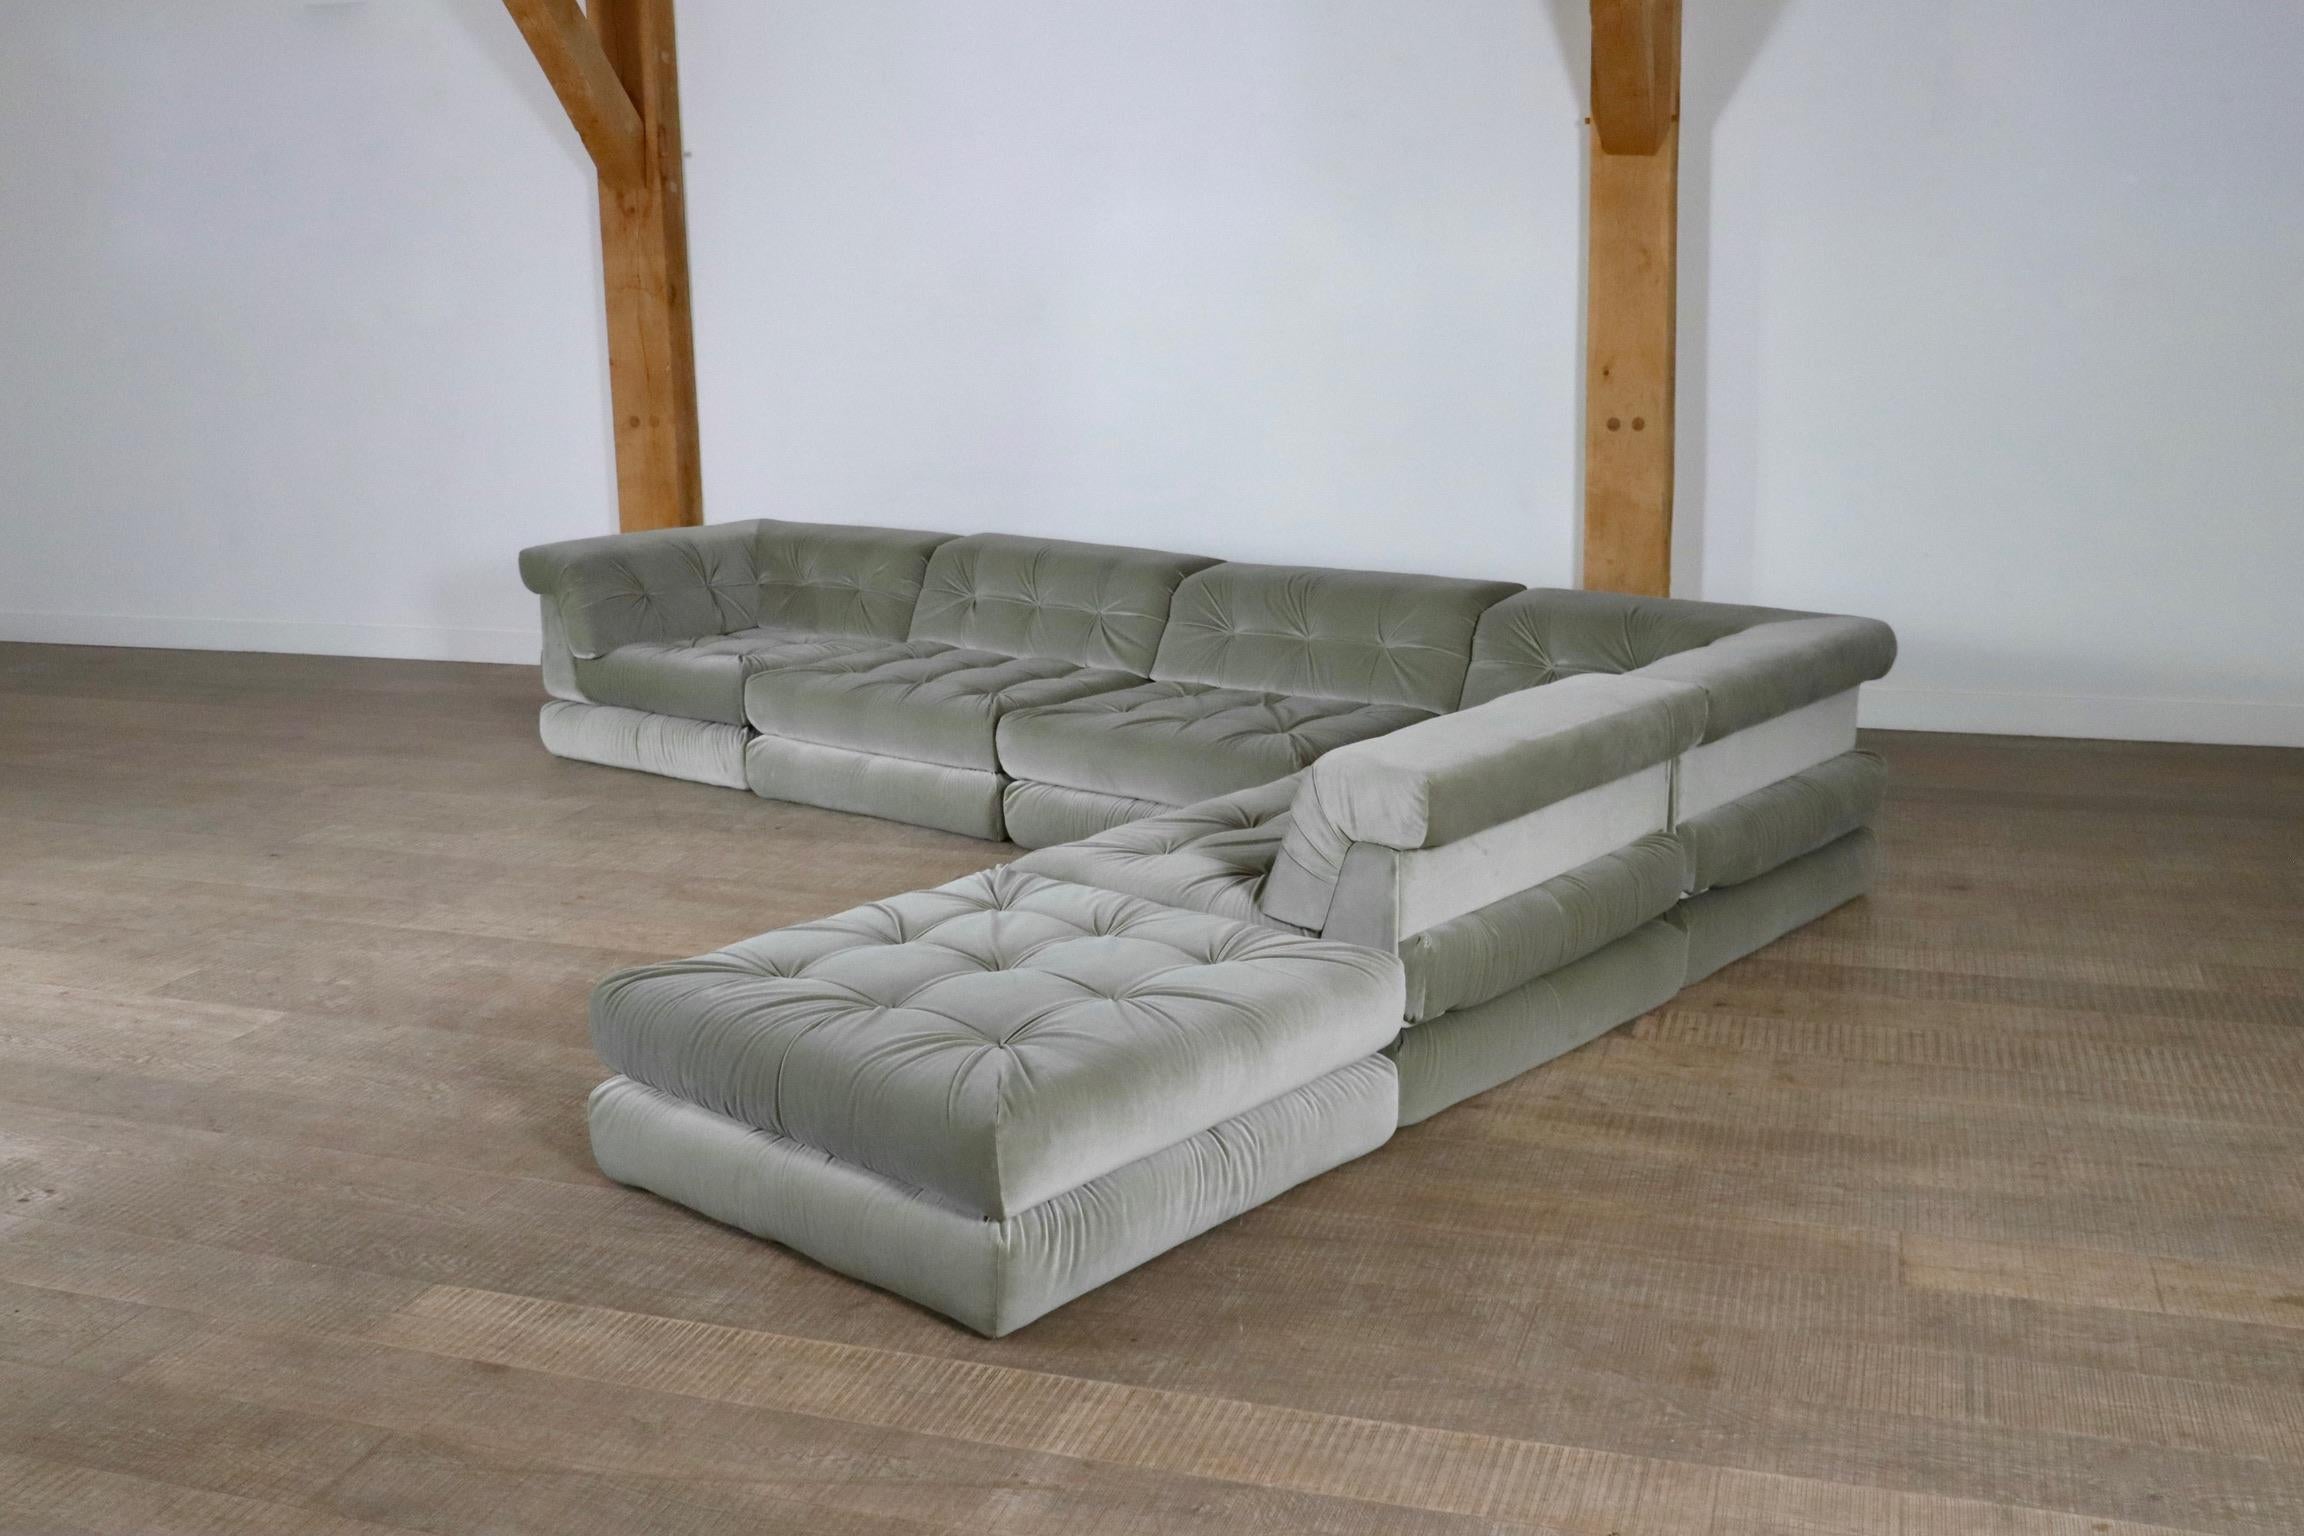 Marvelous First edition Mah Jong sofa set designed by Hans Hopfer for Roche Bobois in 1971. This sofa offers complete freedom of form and function. This particular set is reupholstered in a high quality cotton velvet in a beautiful sage green